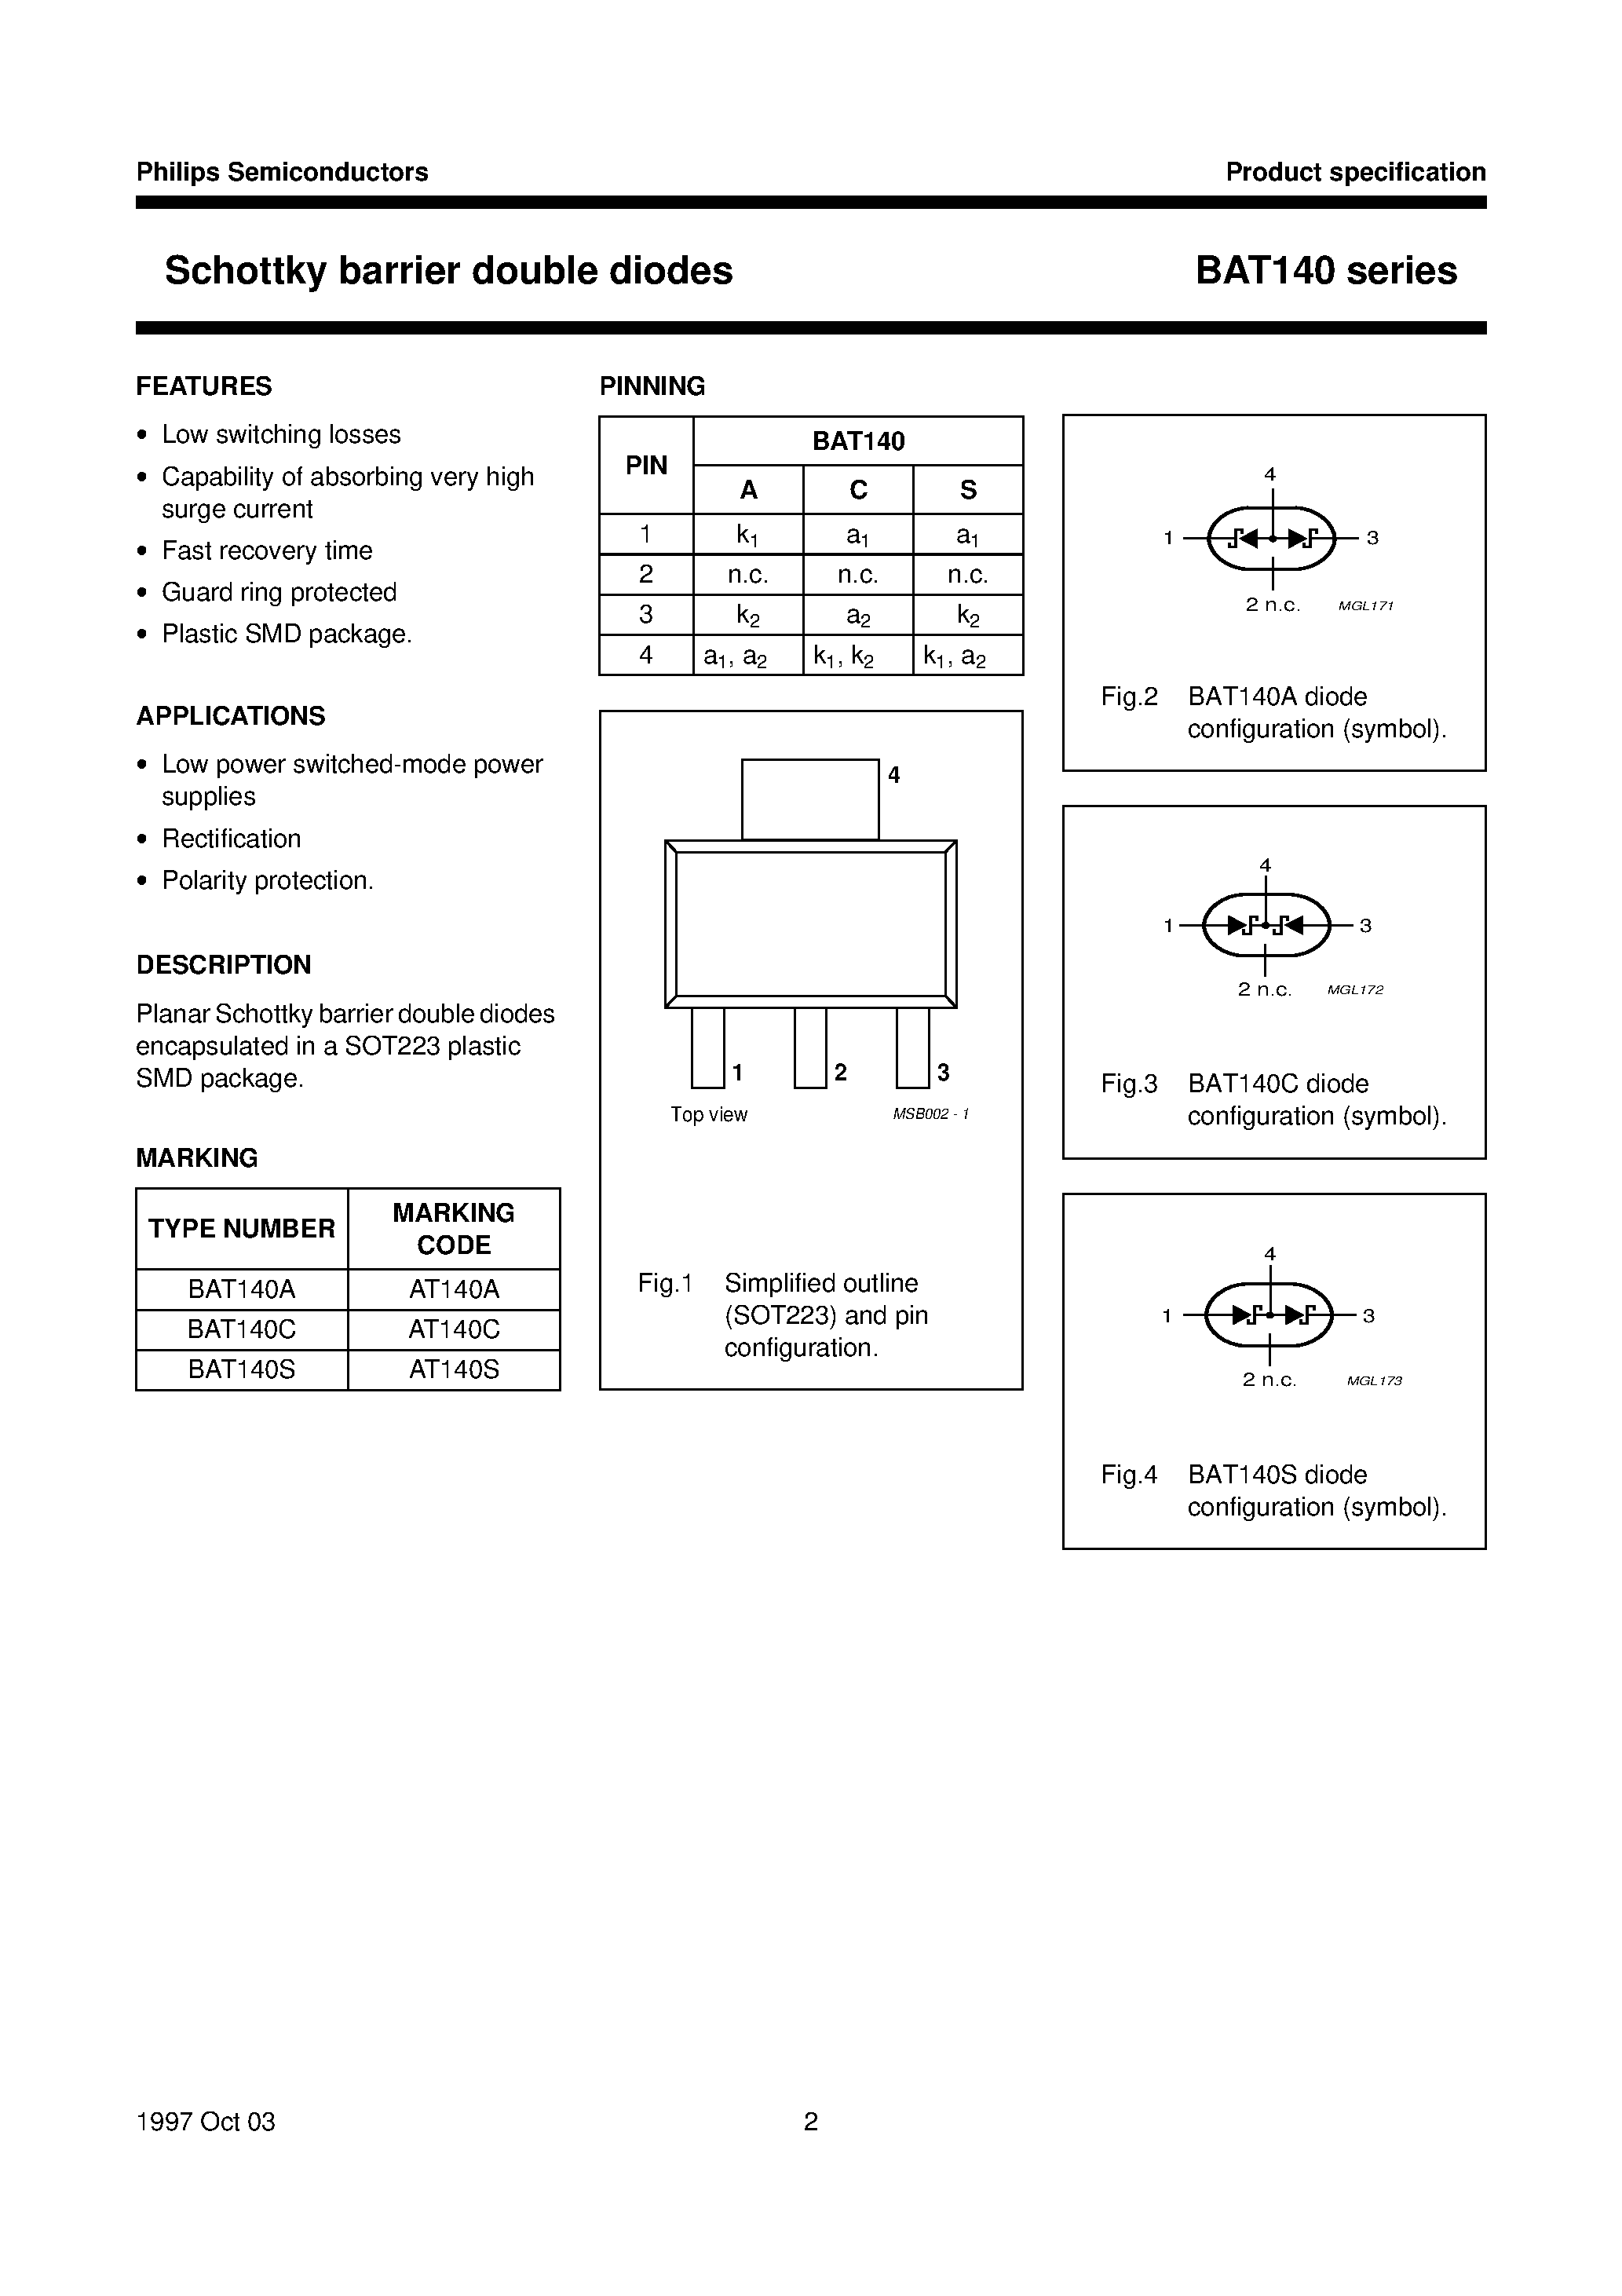 Datasheet BAT140A - Schottky barrier double diodes page 2